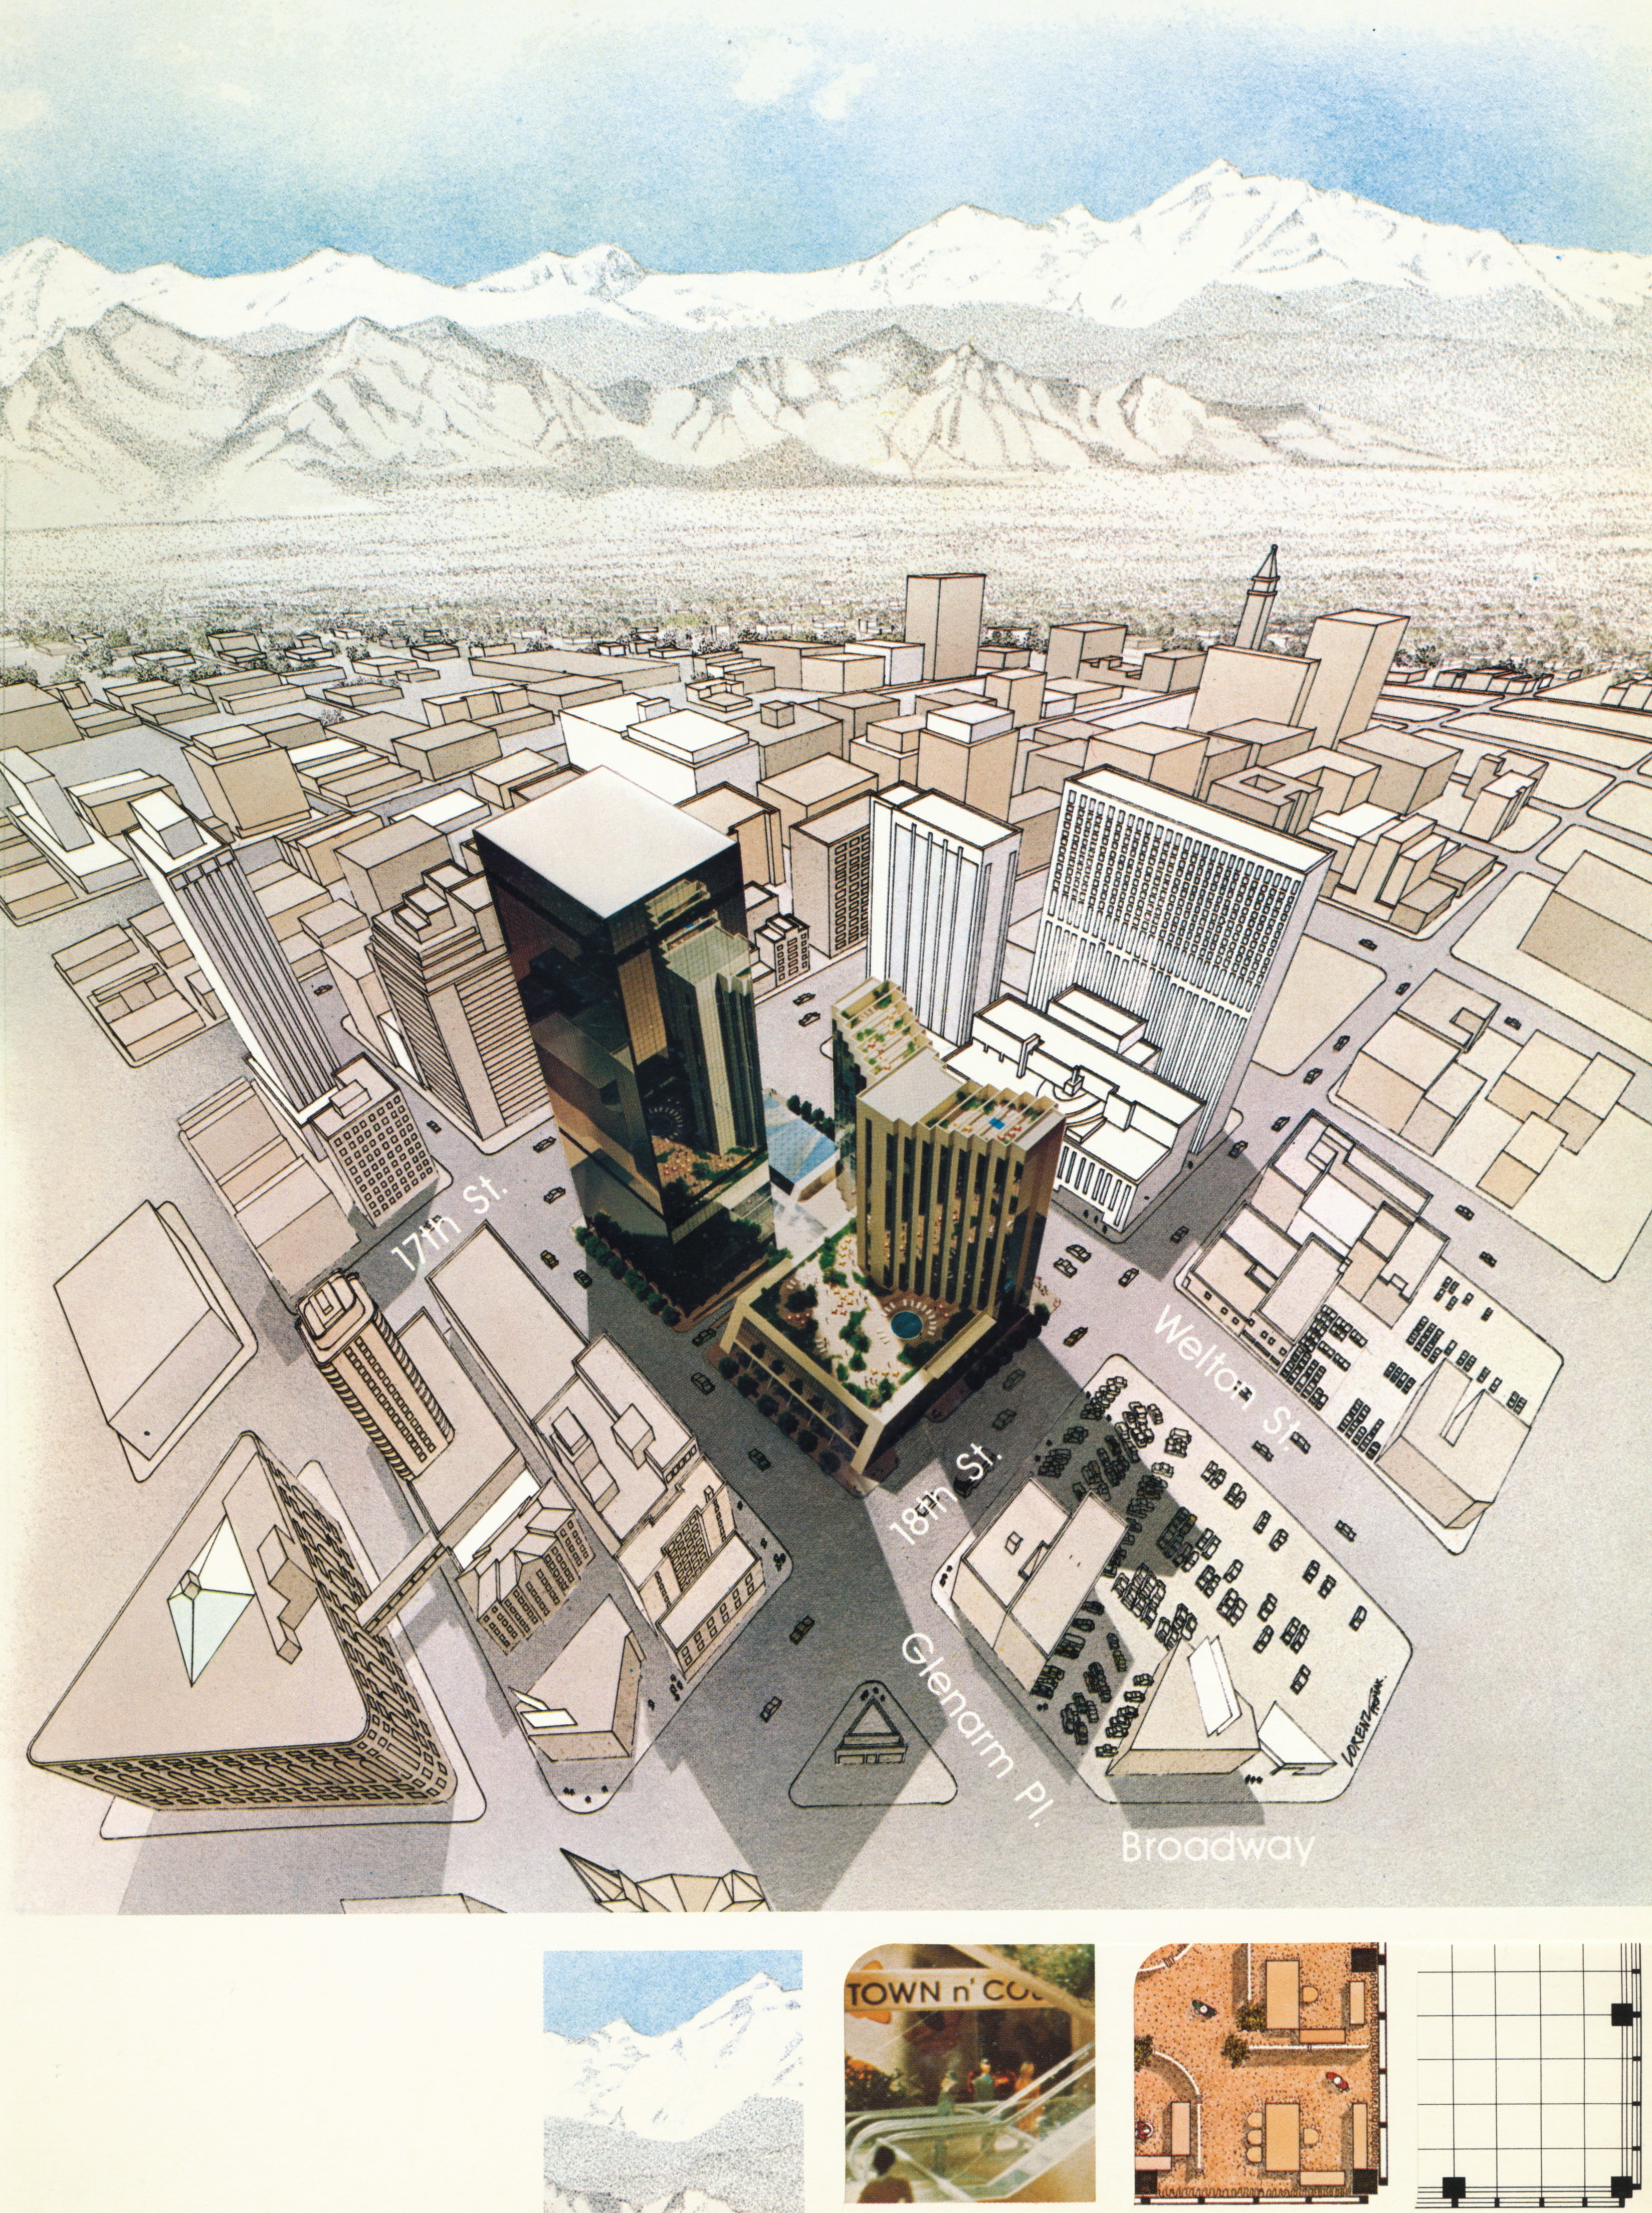 Original Denver Square brochure featuring aerial drawing of the complex.